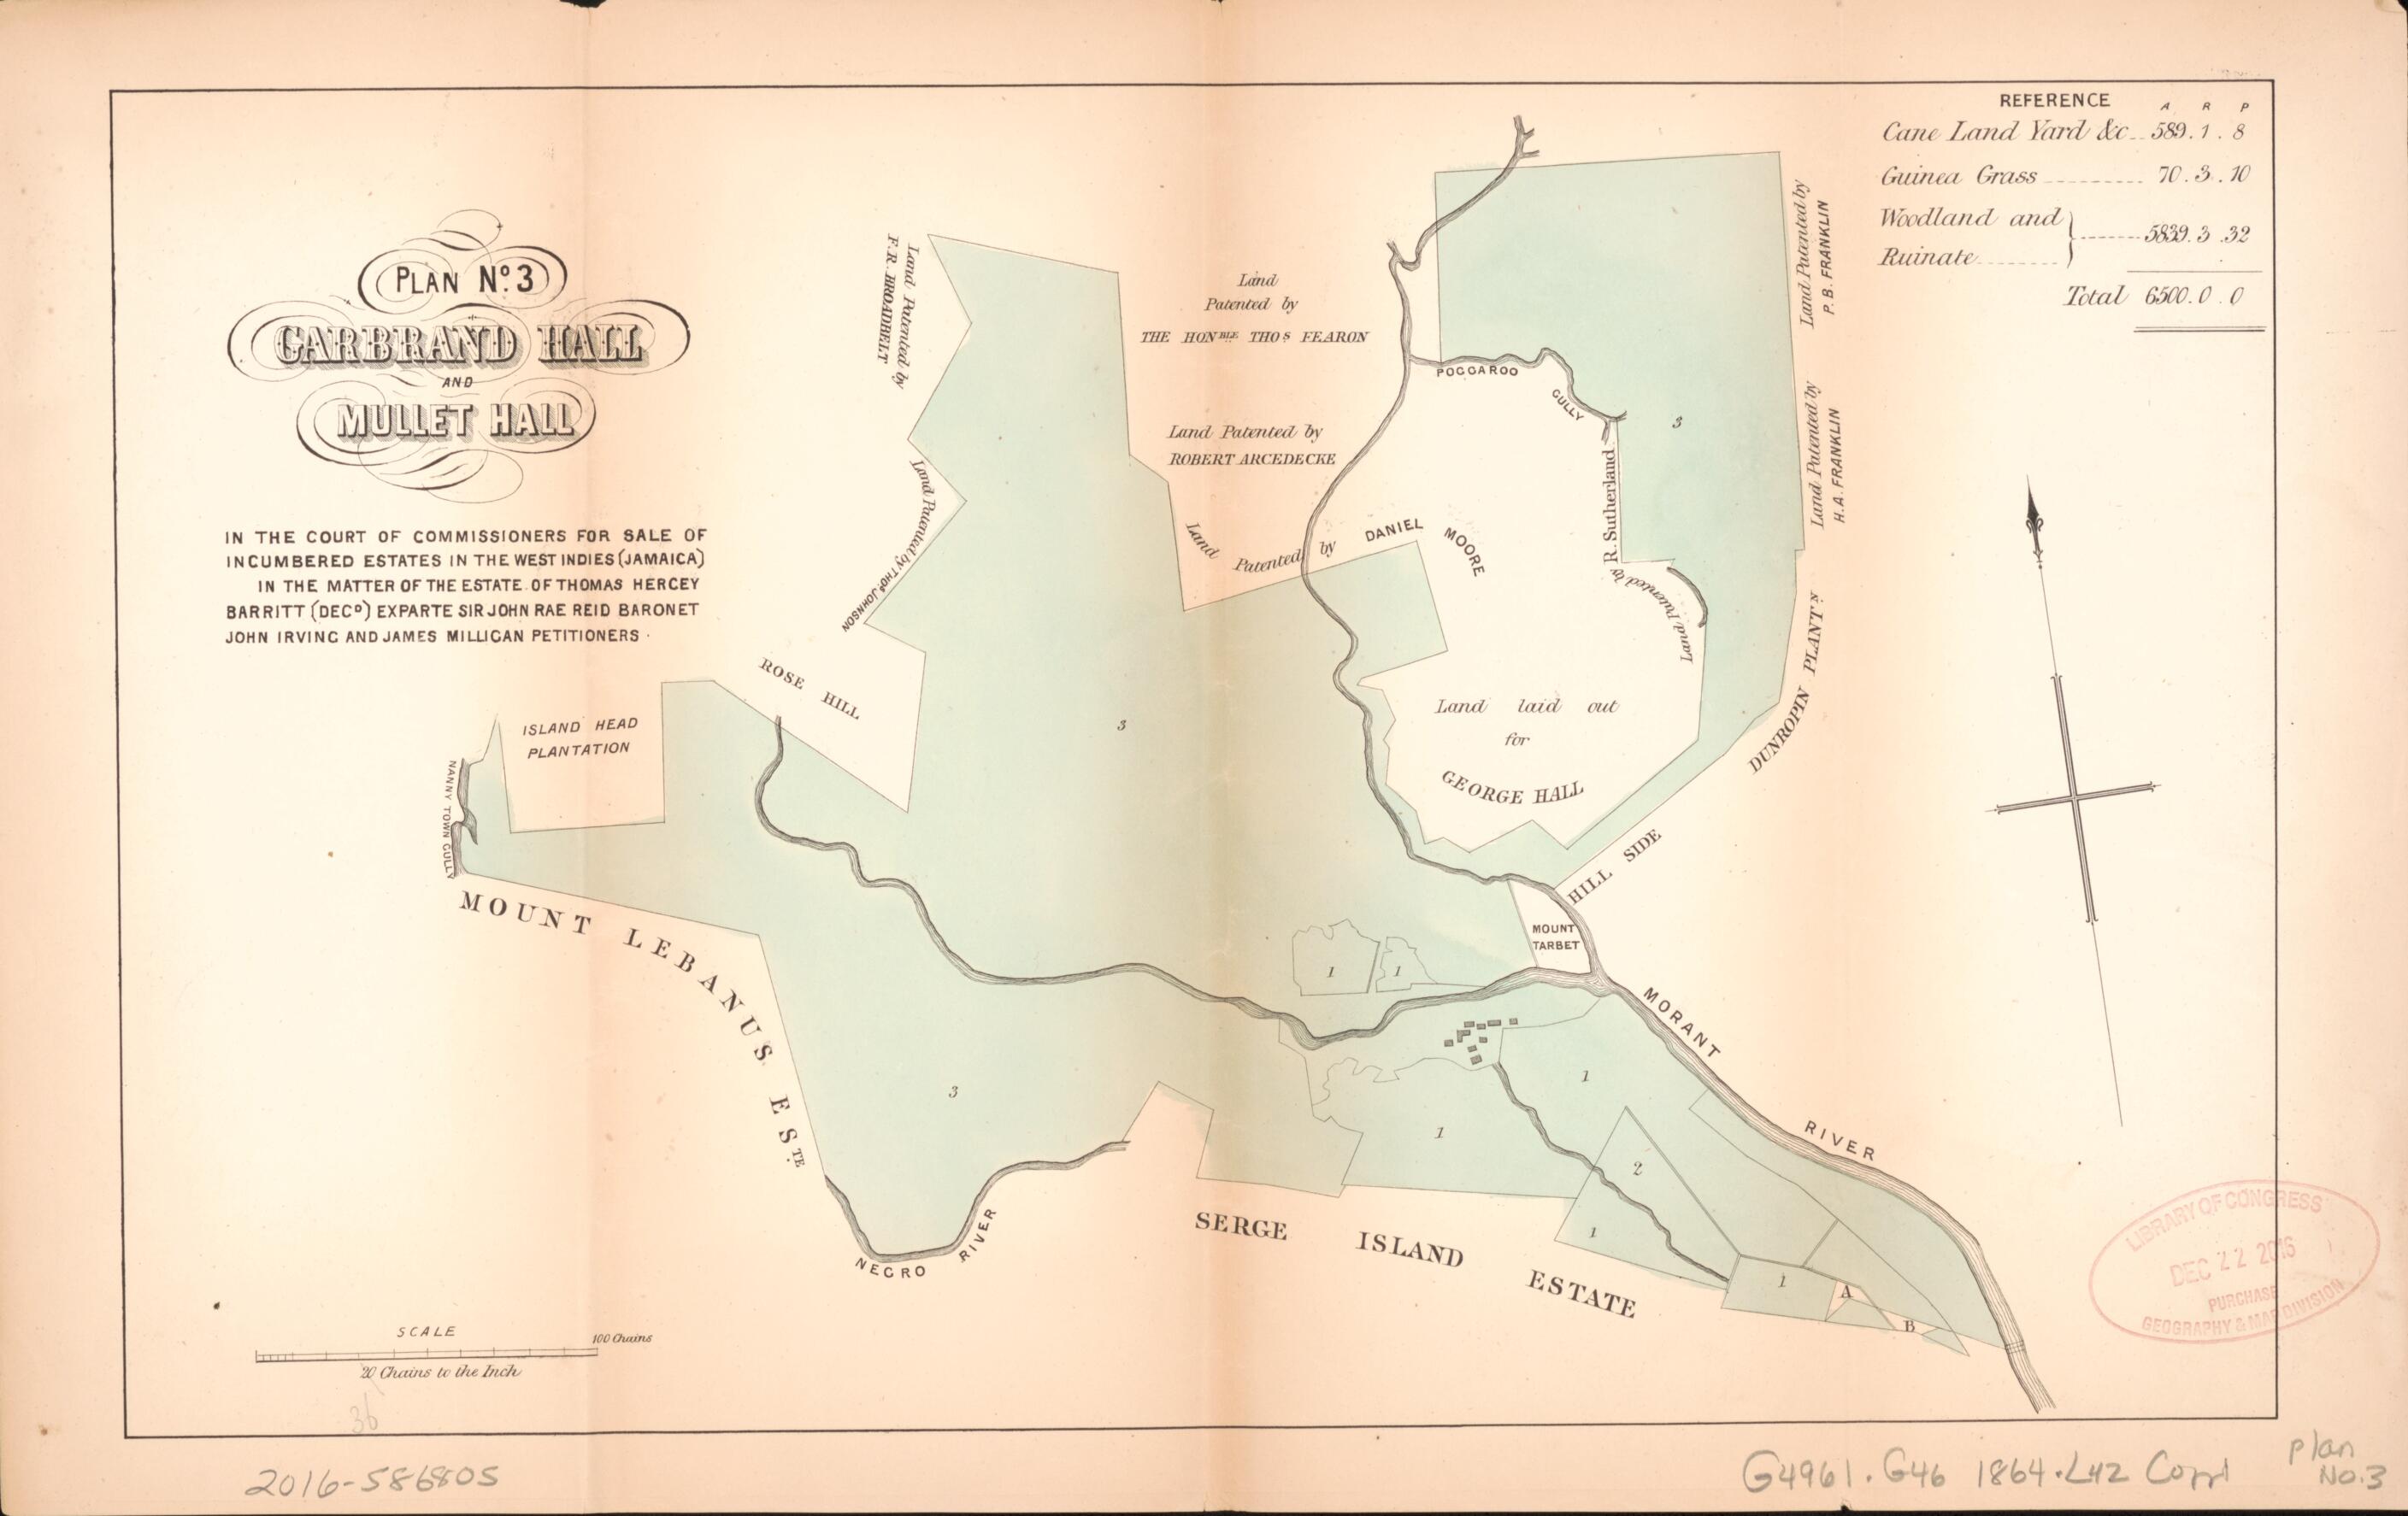 This old map of Plan No. 3 Garbrand Hall and Mullet Hall from Encumbered Estates In the West Indies (Jamaica) from 1864 was created by Henry James Stonor in 1864